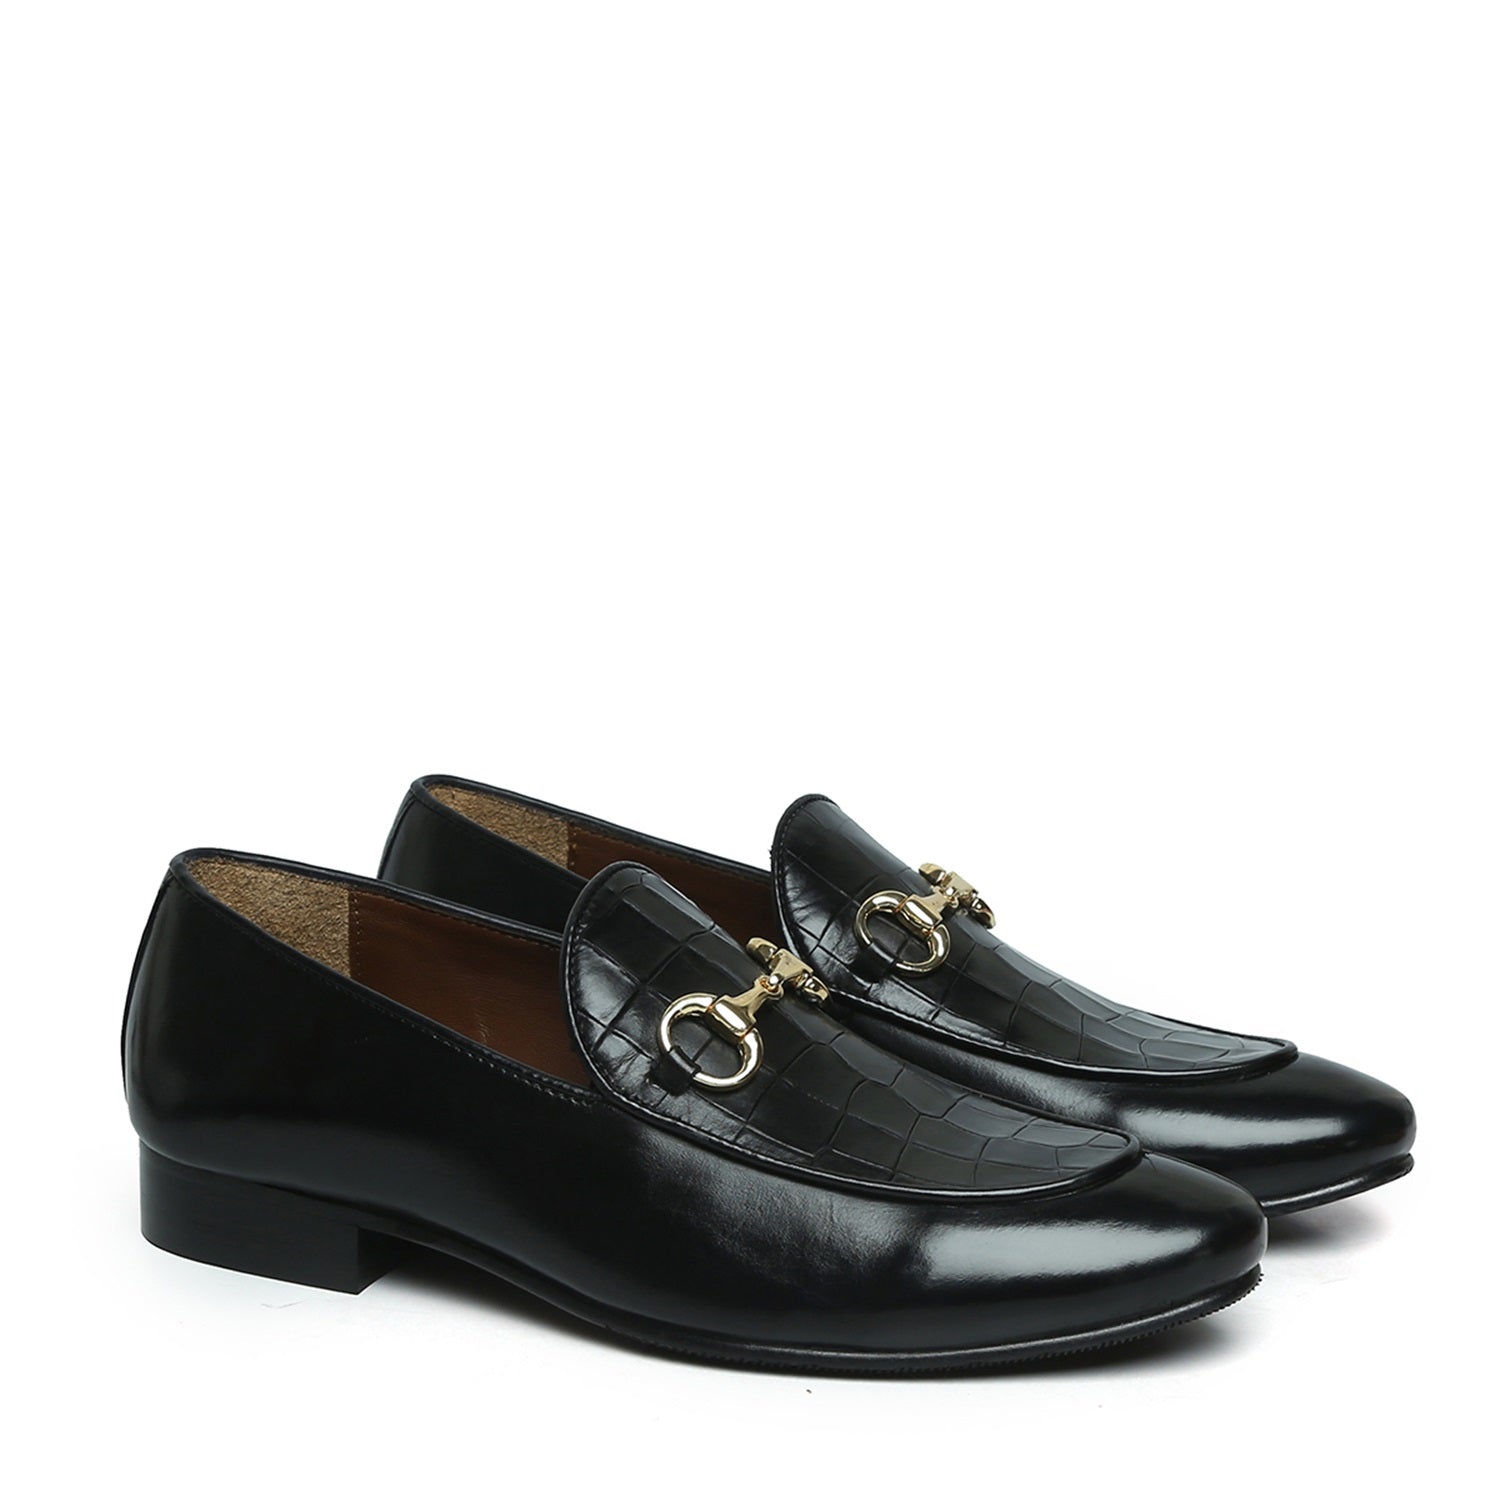 Black Horsebit Loafers With Deep Cut Croco Leather at Vamp